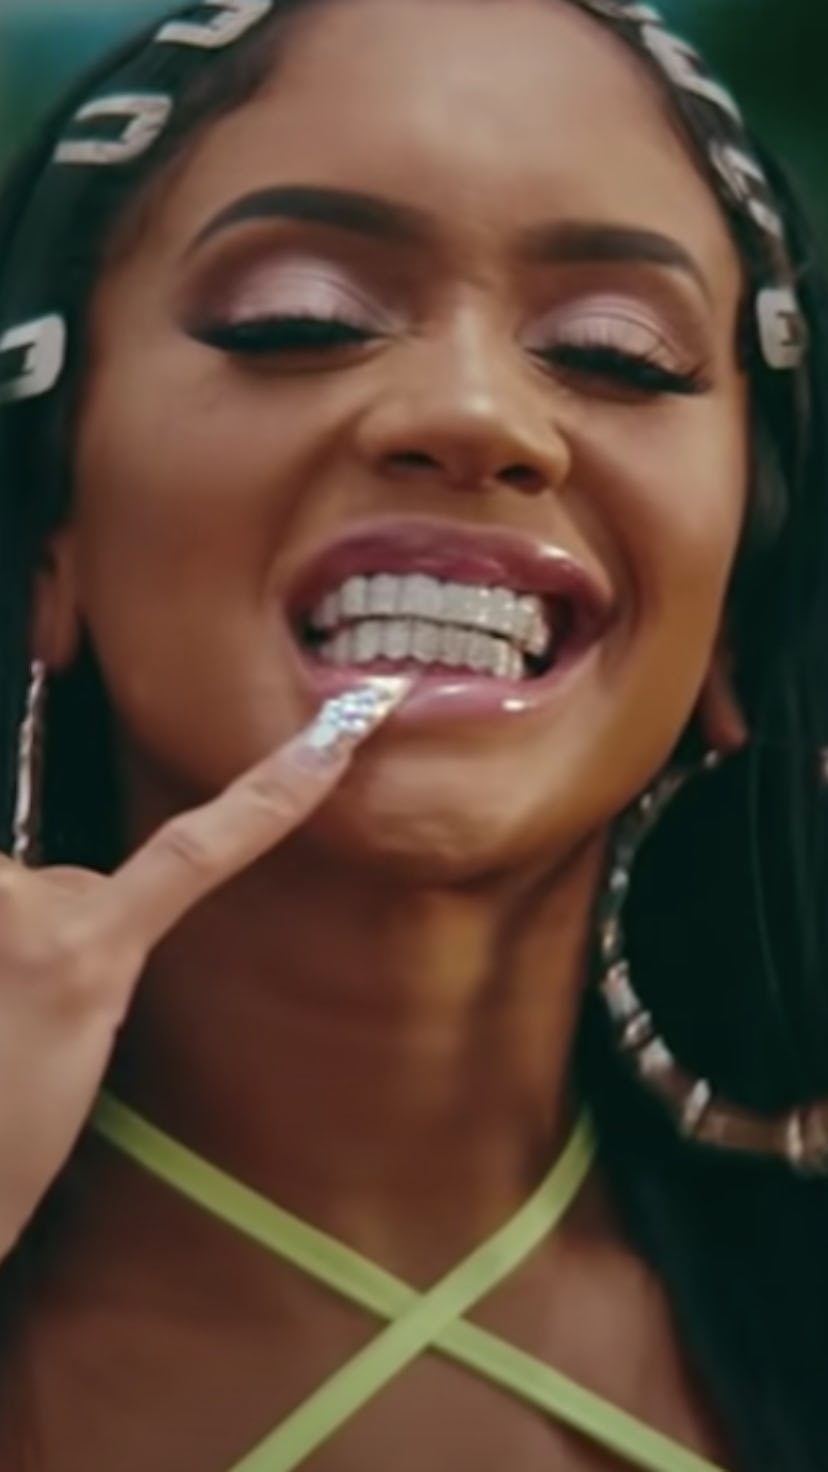 A still from Saweetie's "My Type" music video.